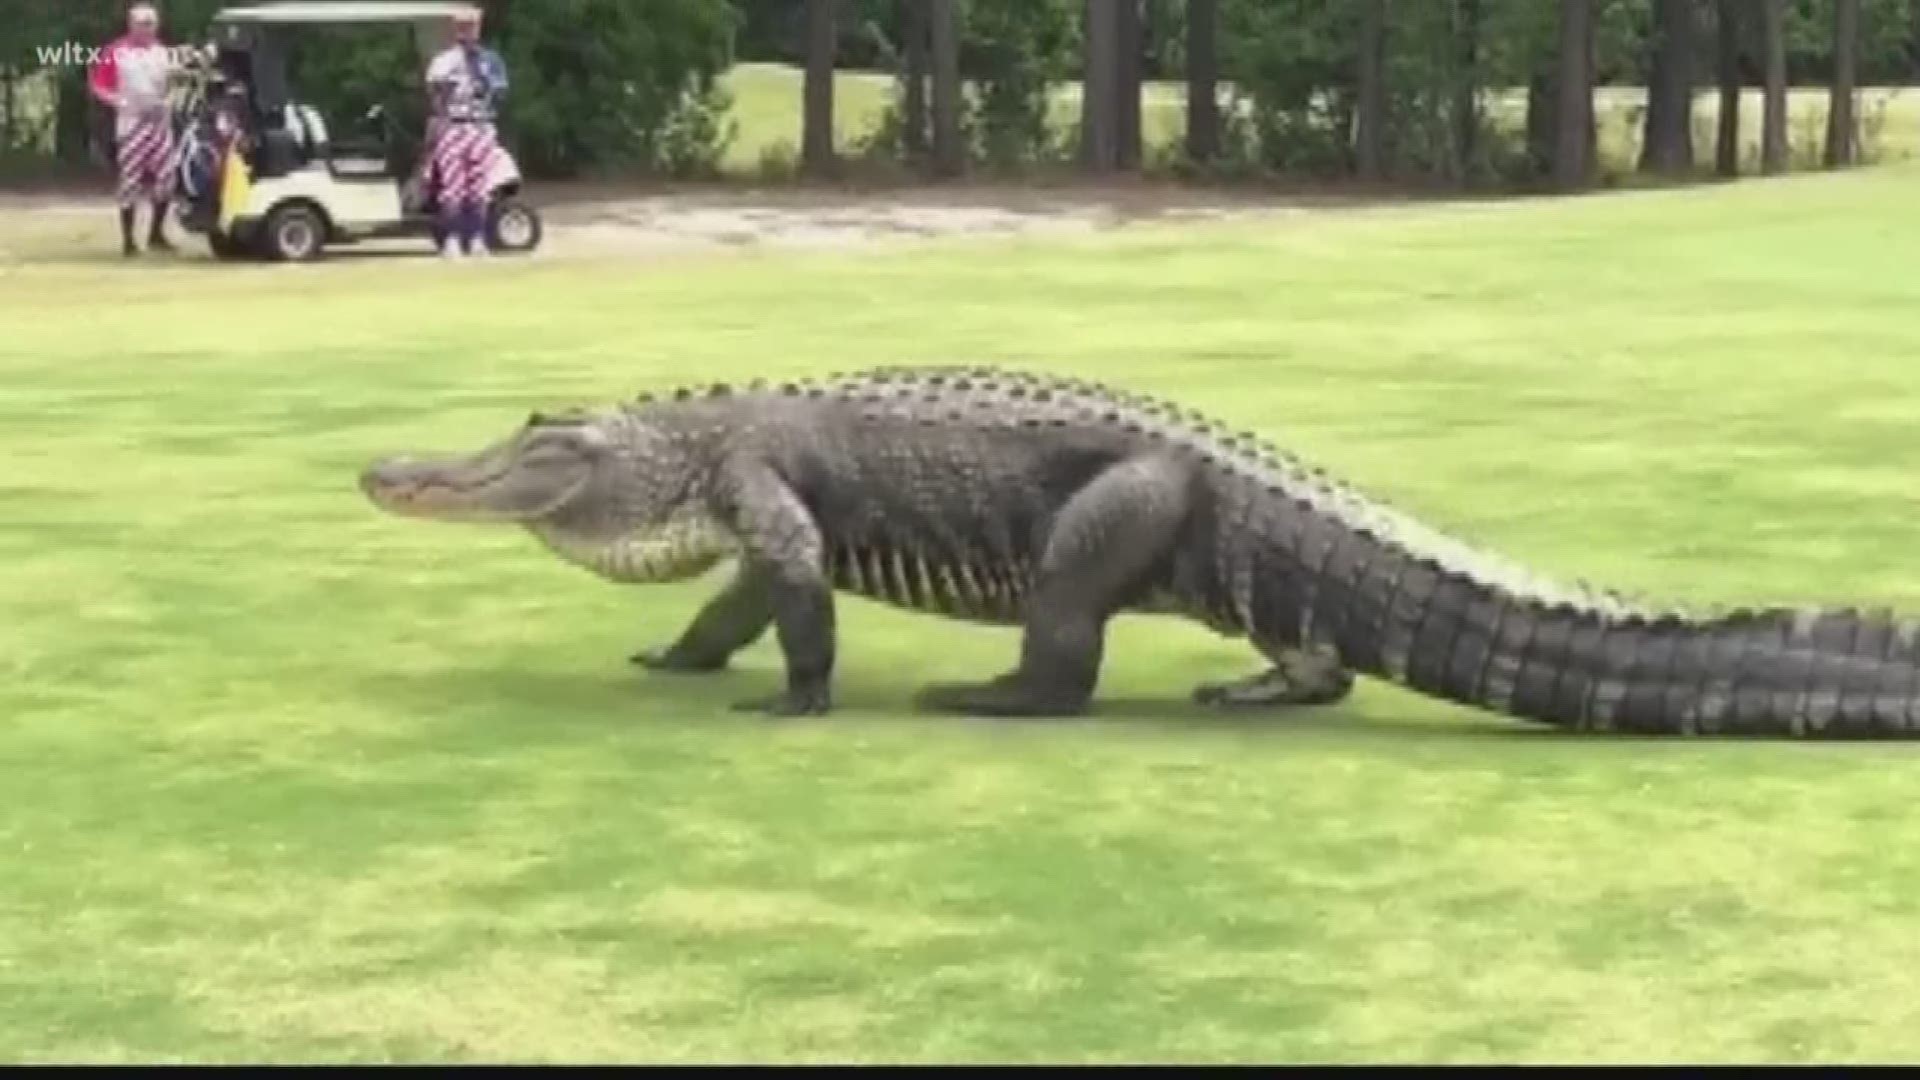 Golfers at the Parris Island Golf Course wait as a giant alligator takes a stroll across the green 